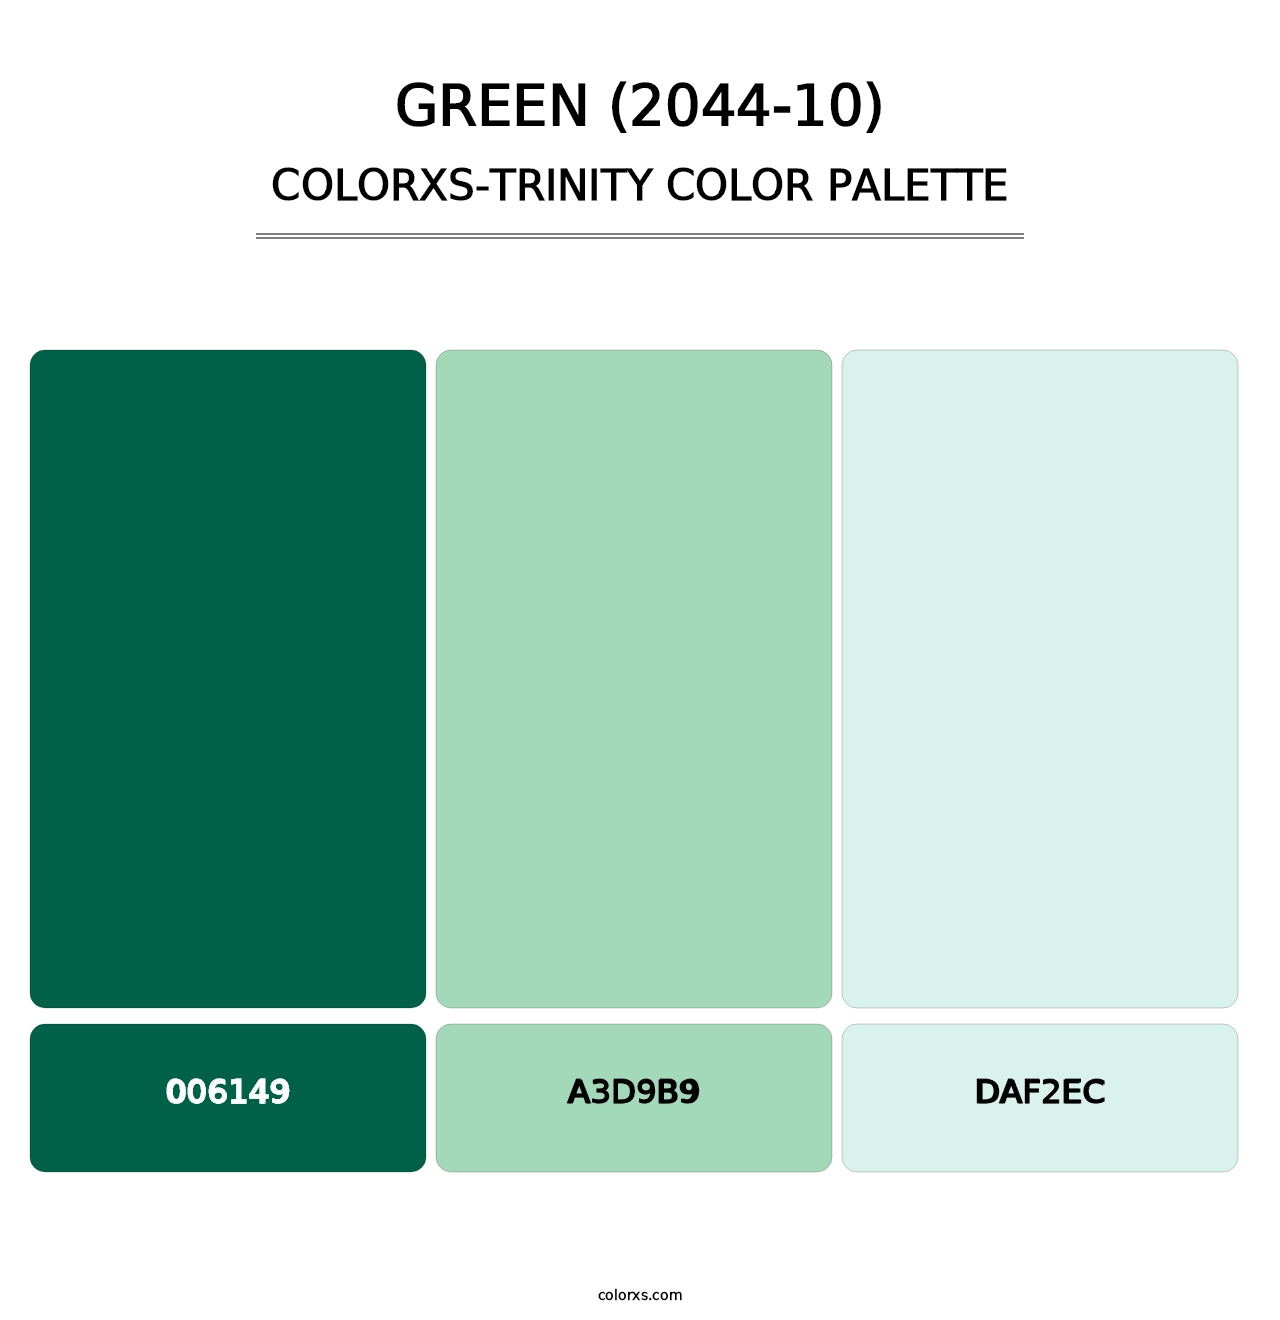 Green (2044-10) - Colorxs Trinity Palette